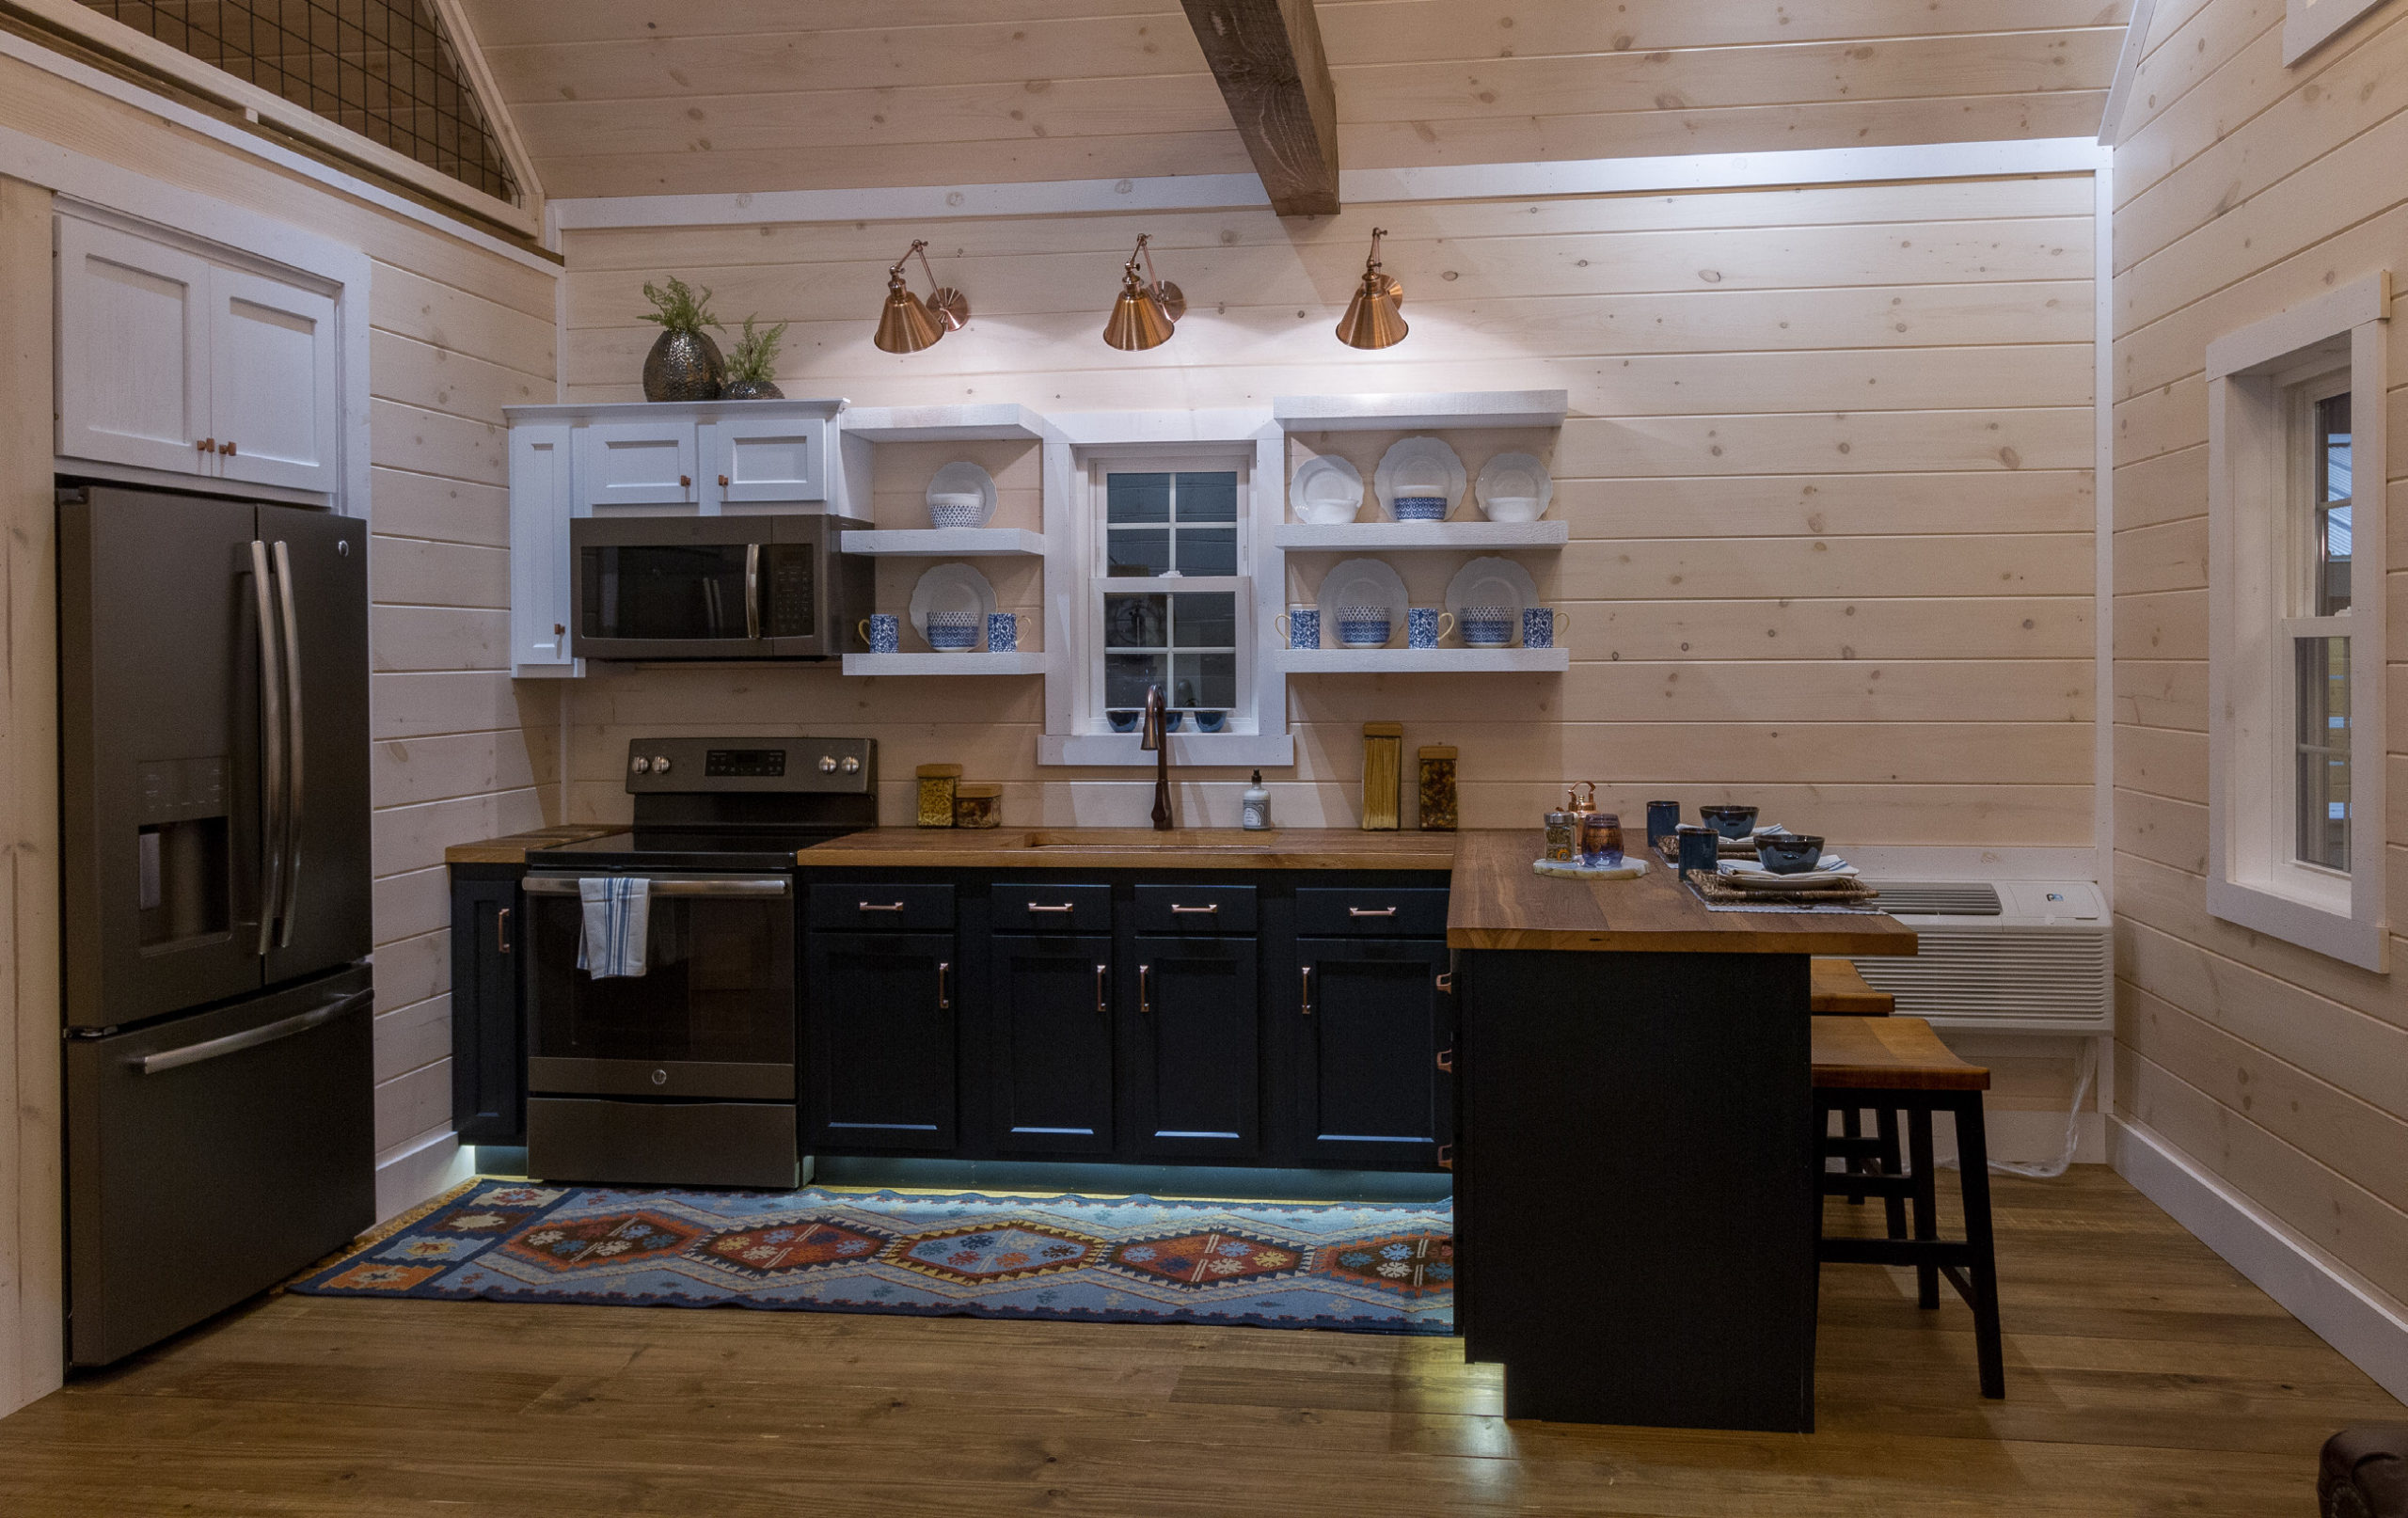 Kitchen and Dining Area of Rocky Ridge Cabin by Weaver Barns of Sugarcreek, Ohio. Amish Country Cabin Builders in Central Ohio.